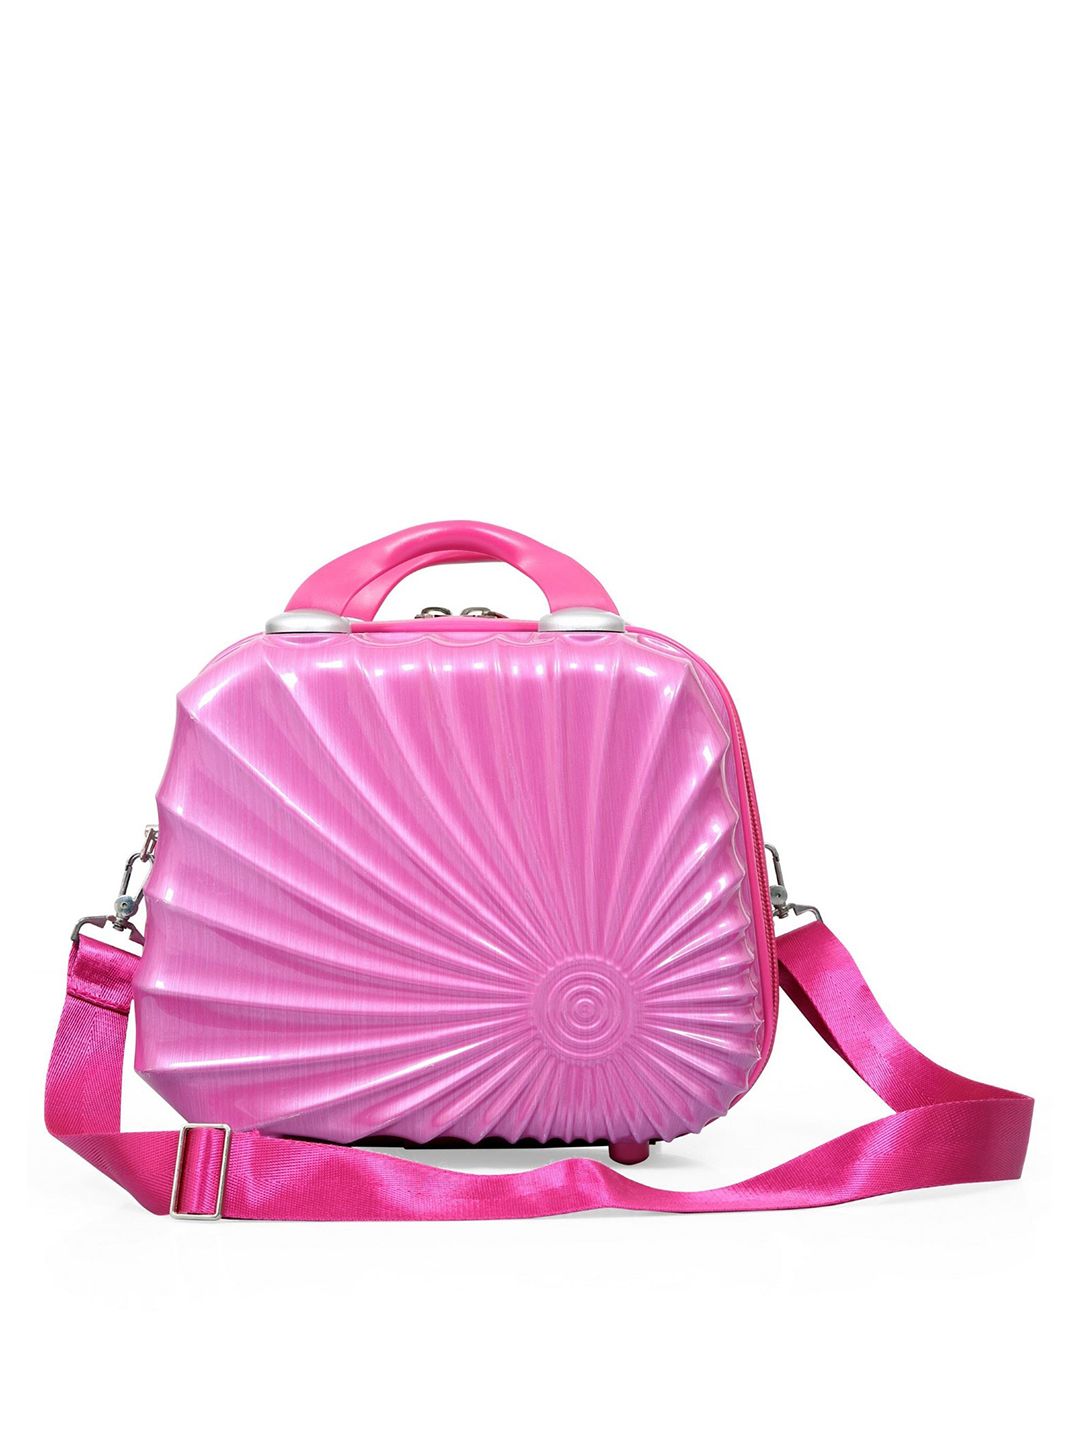 Polo Class Pink Textured Travel Vanity Bag Price in India